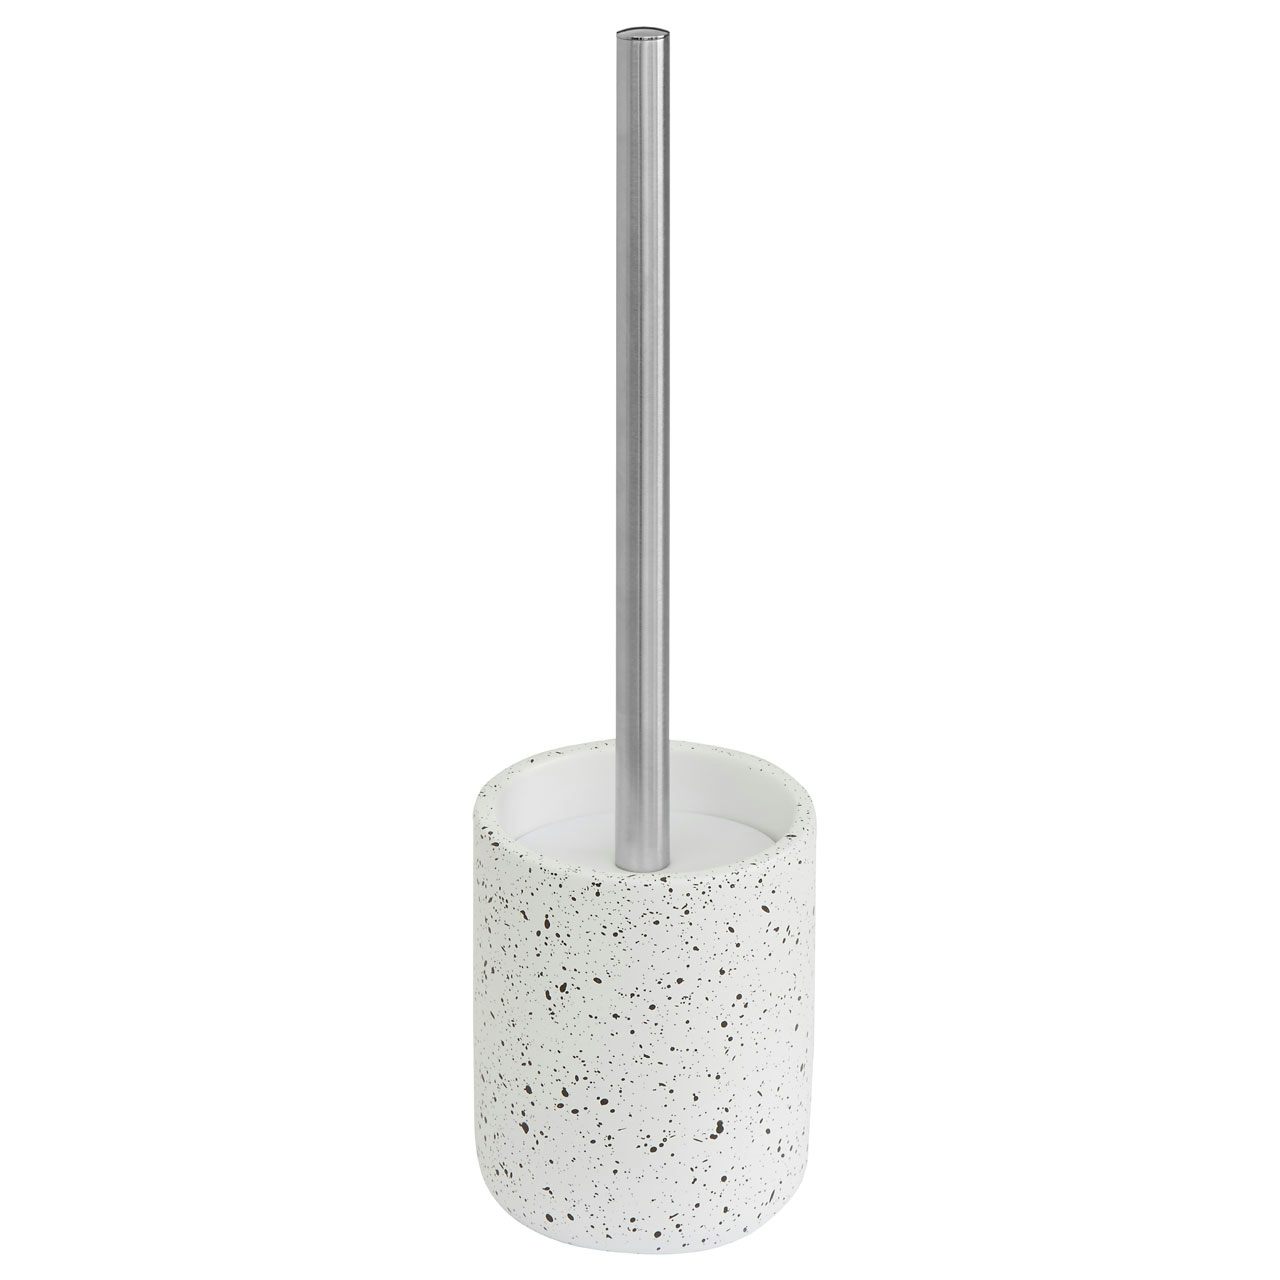 Accents Goza concrete white and black toilet brush and holder